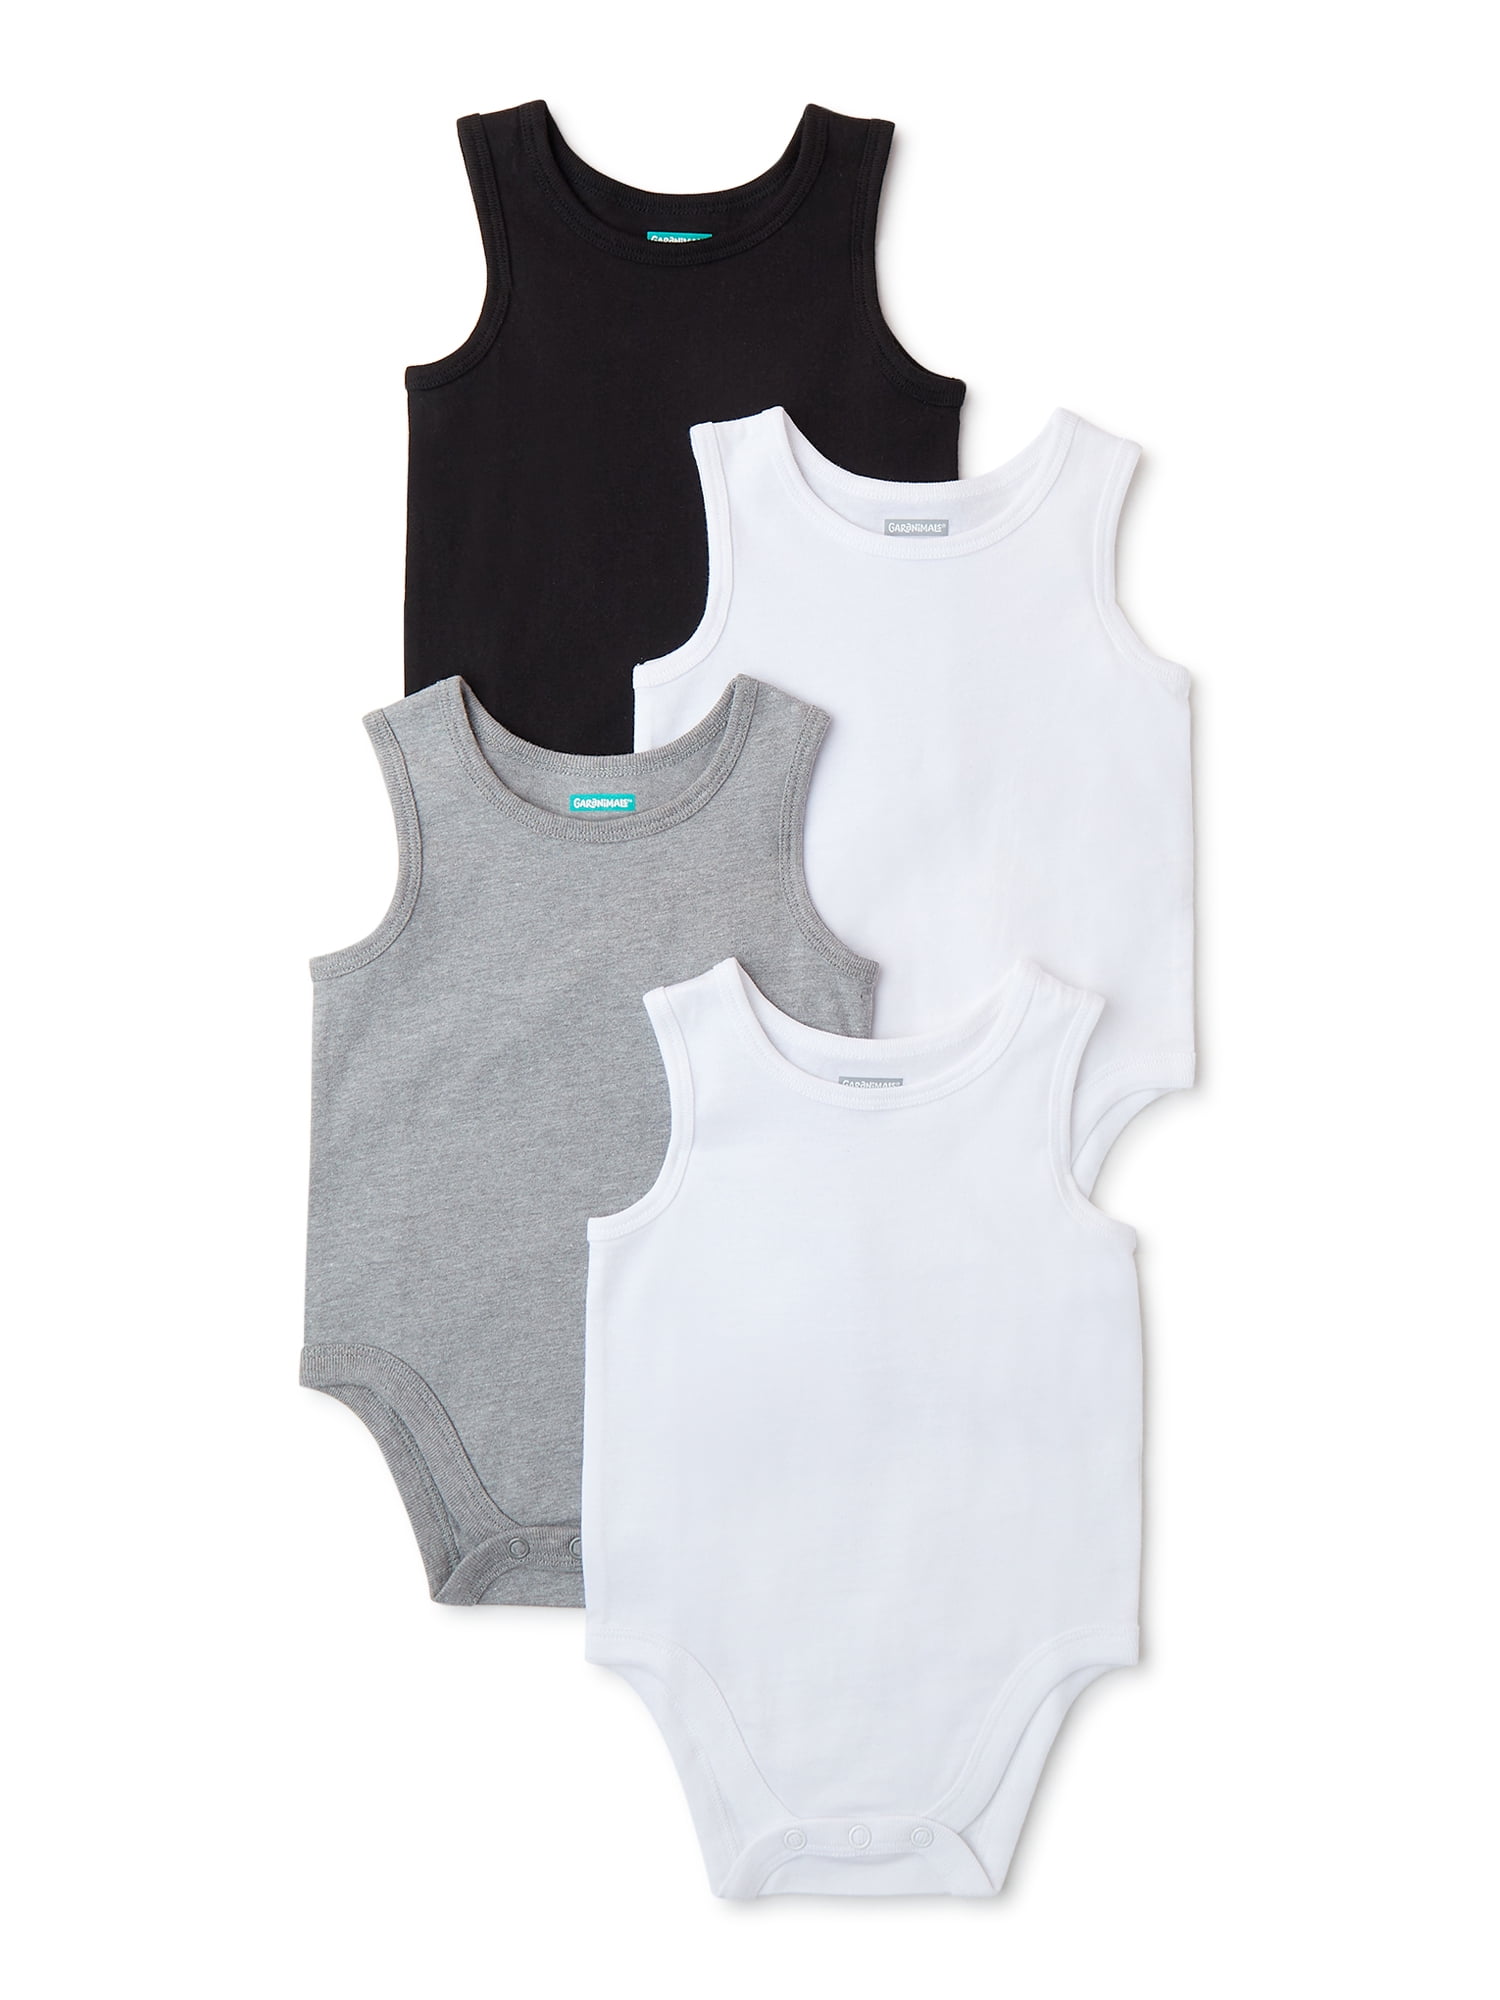 3 Gray 3 Infant 6 Pack Premie Sleeveless One Piece Snap Bodysuits Shirt White 